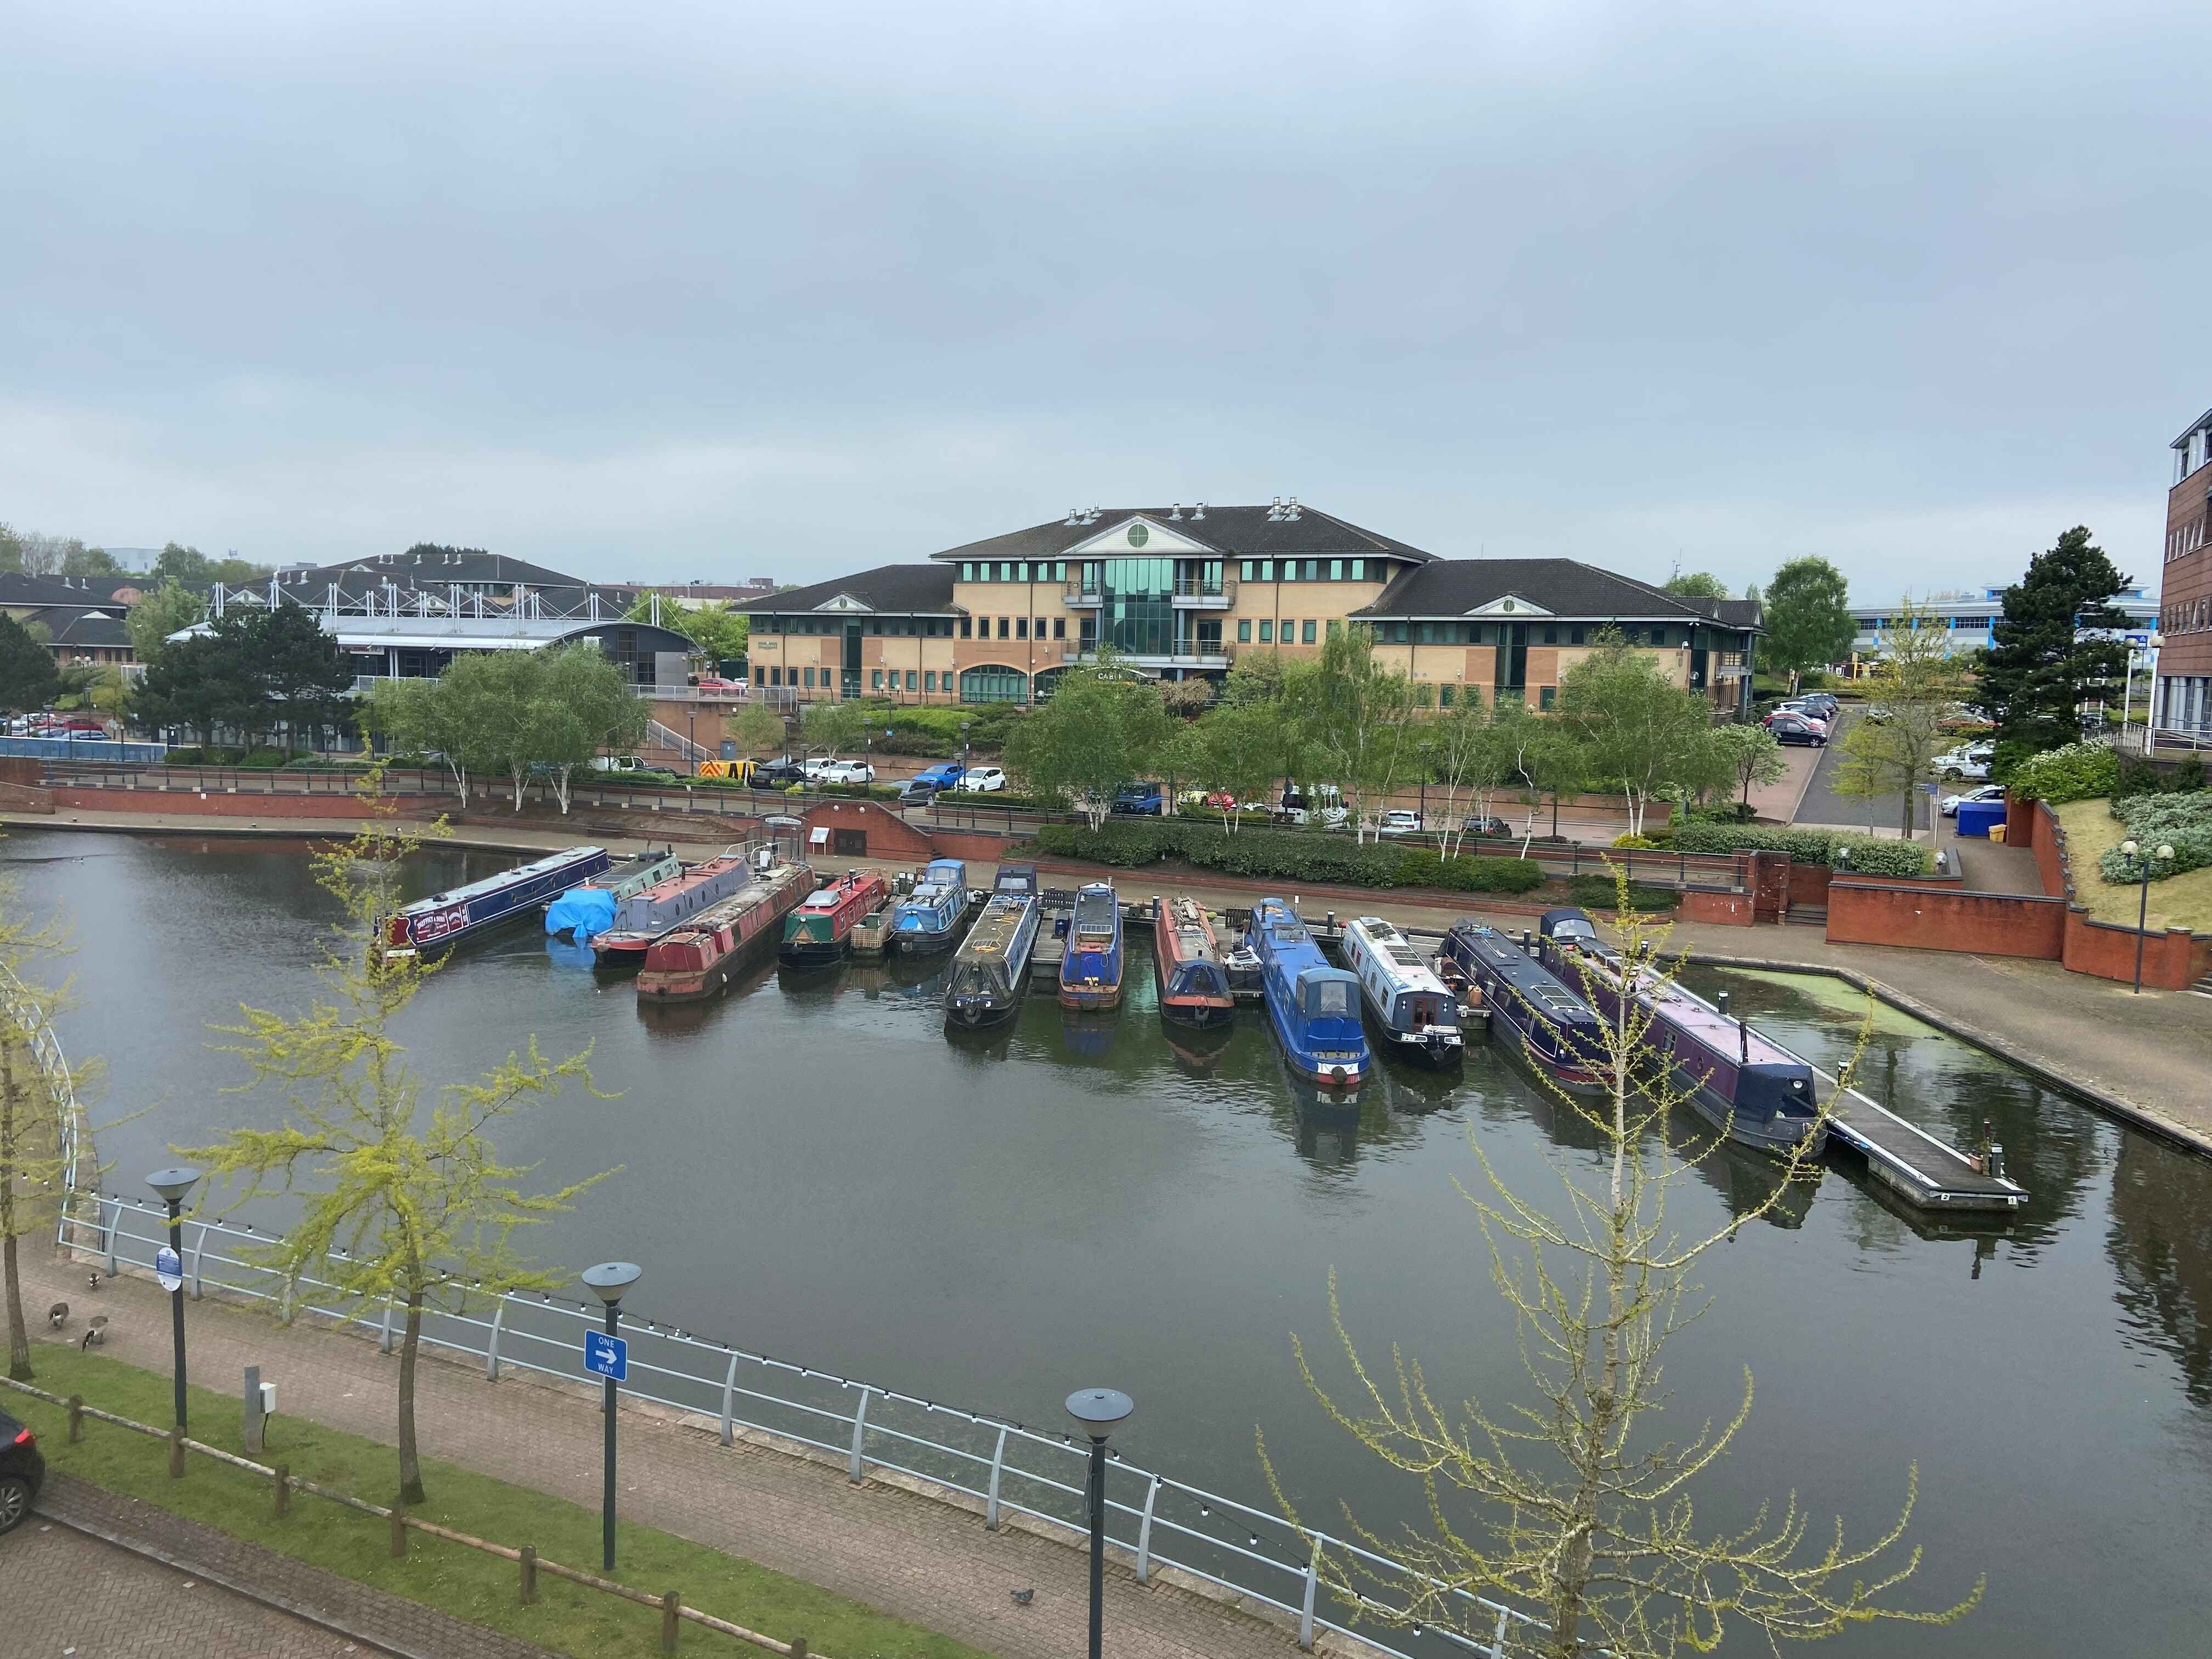 Waterside offices have £750k guide price in auction